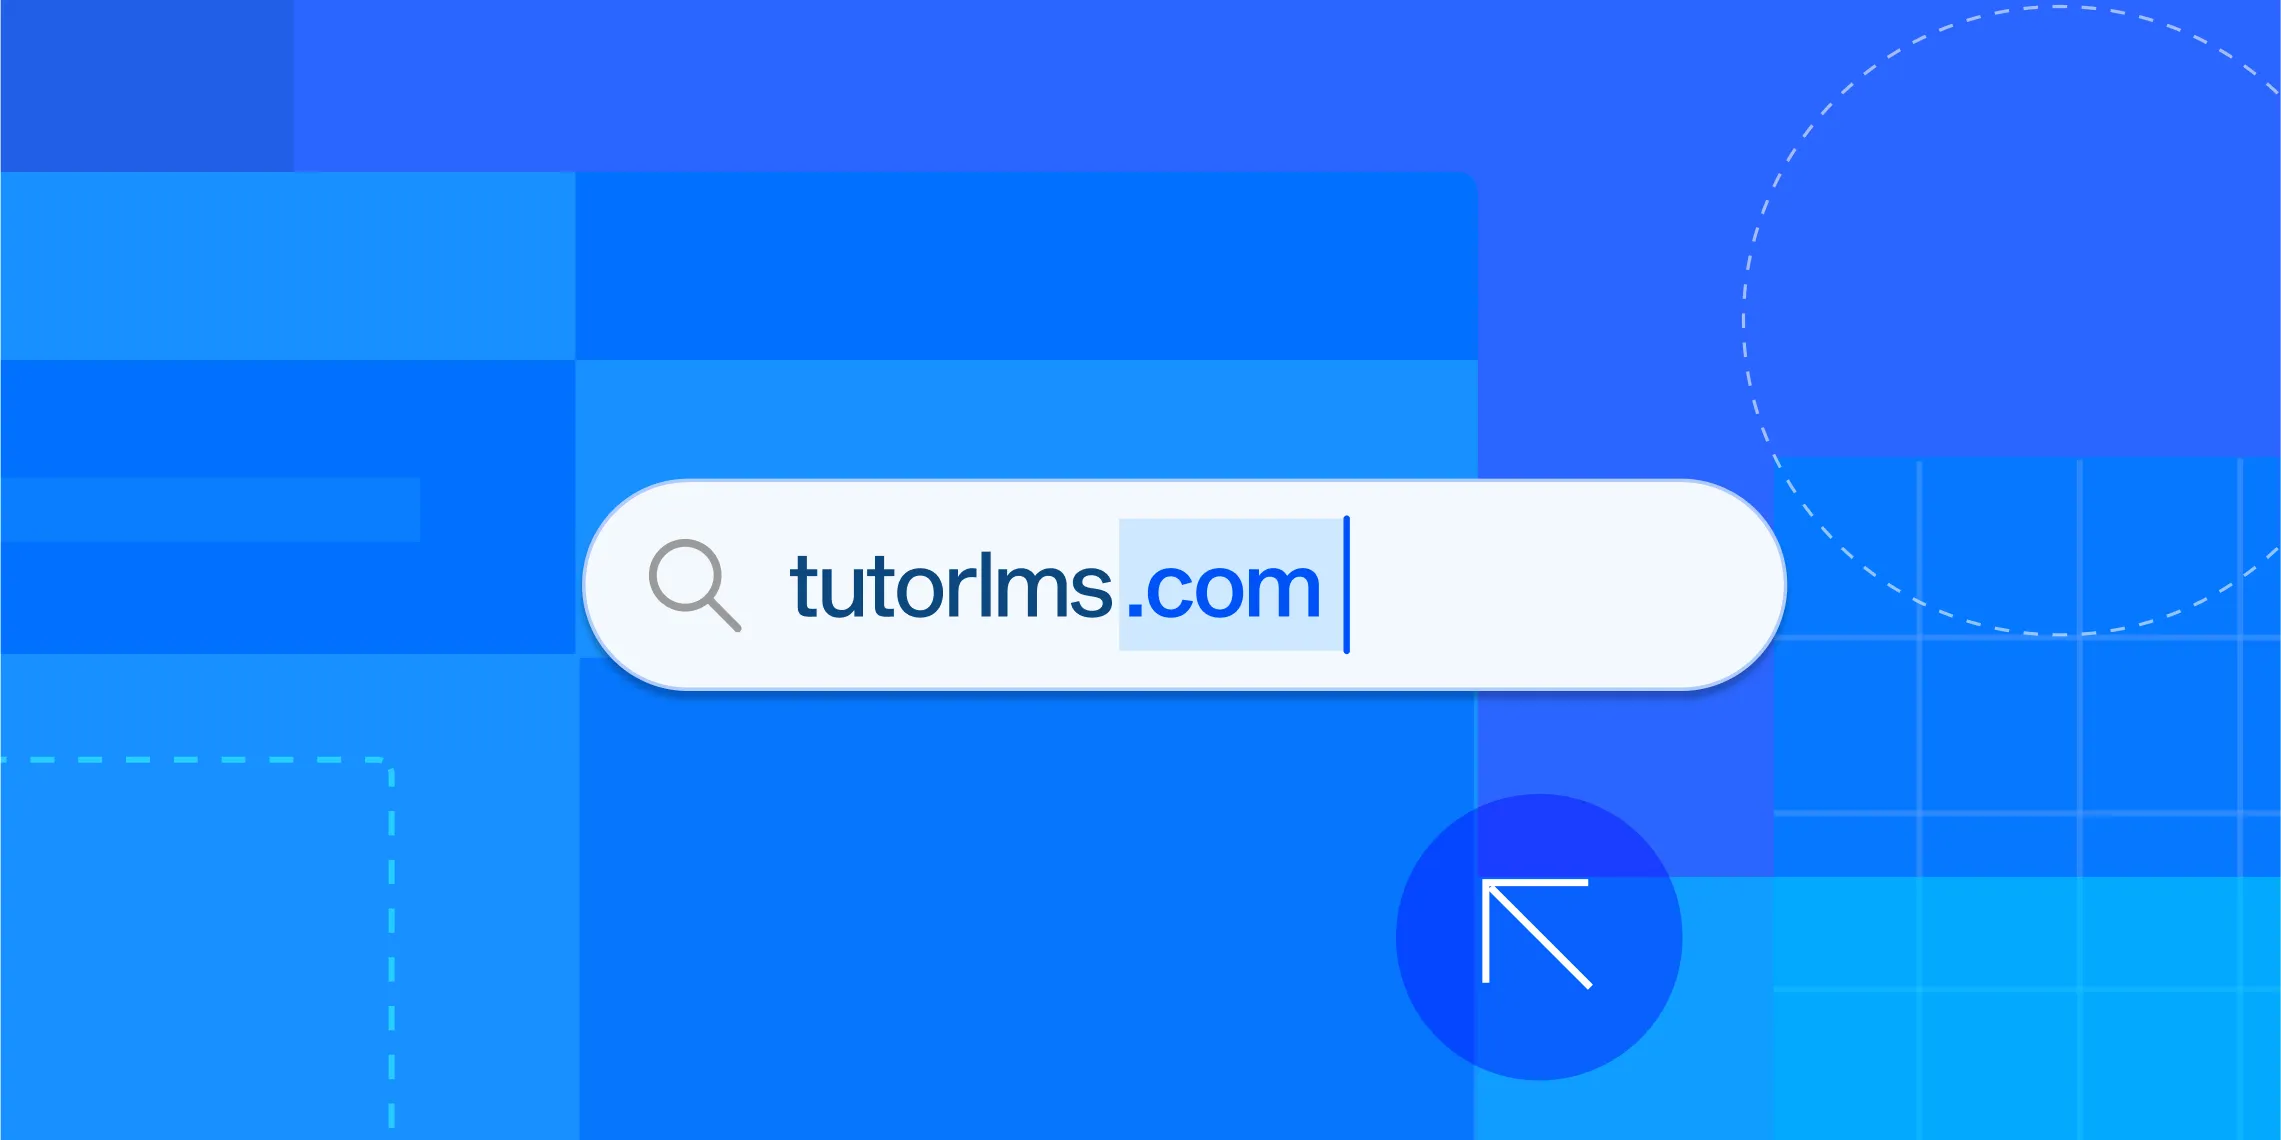 Welcome to the New Home of Tutor LMS!